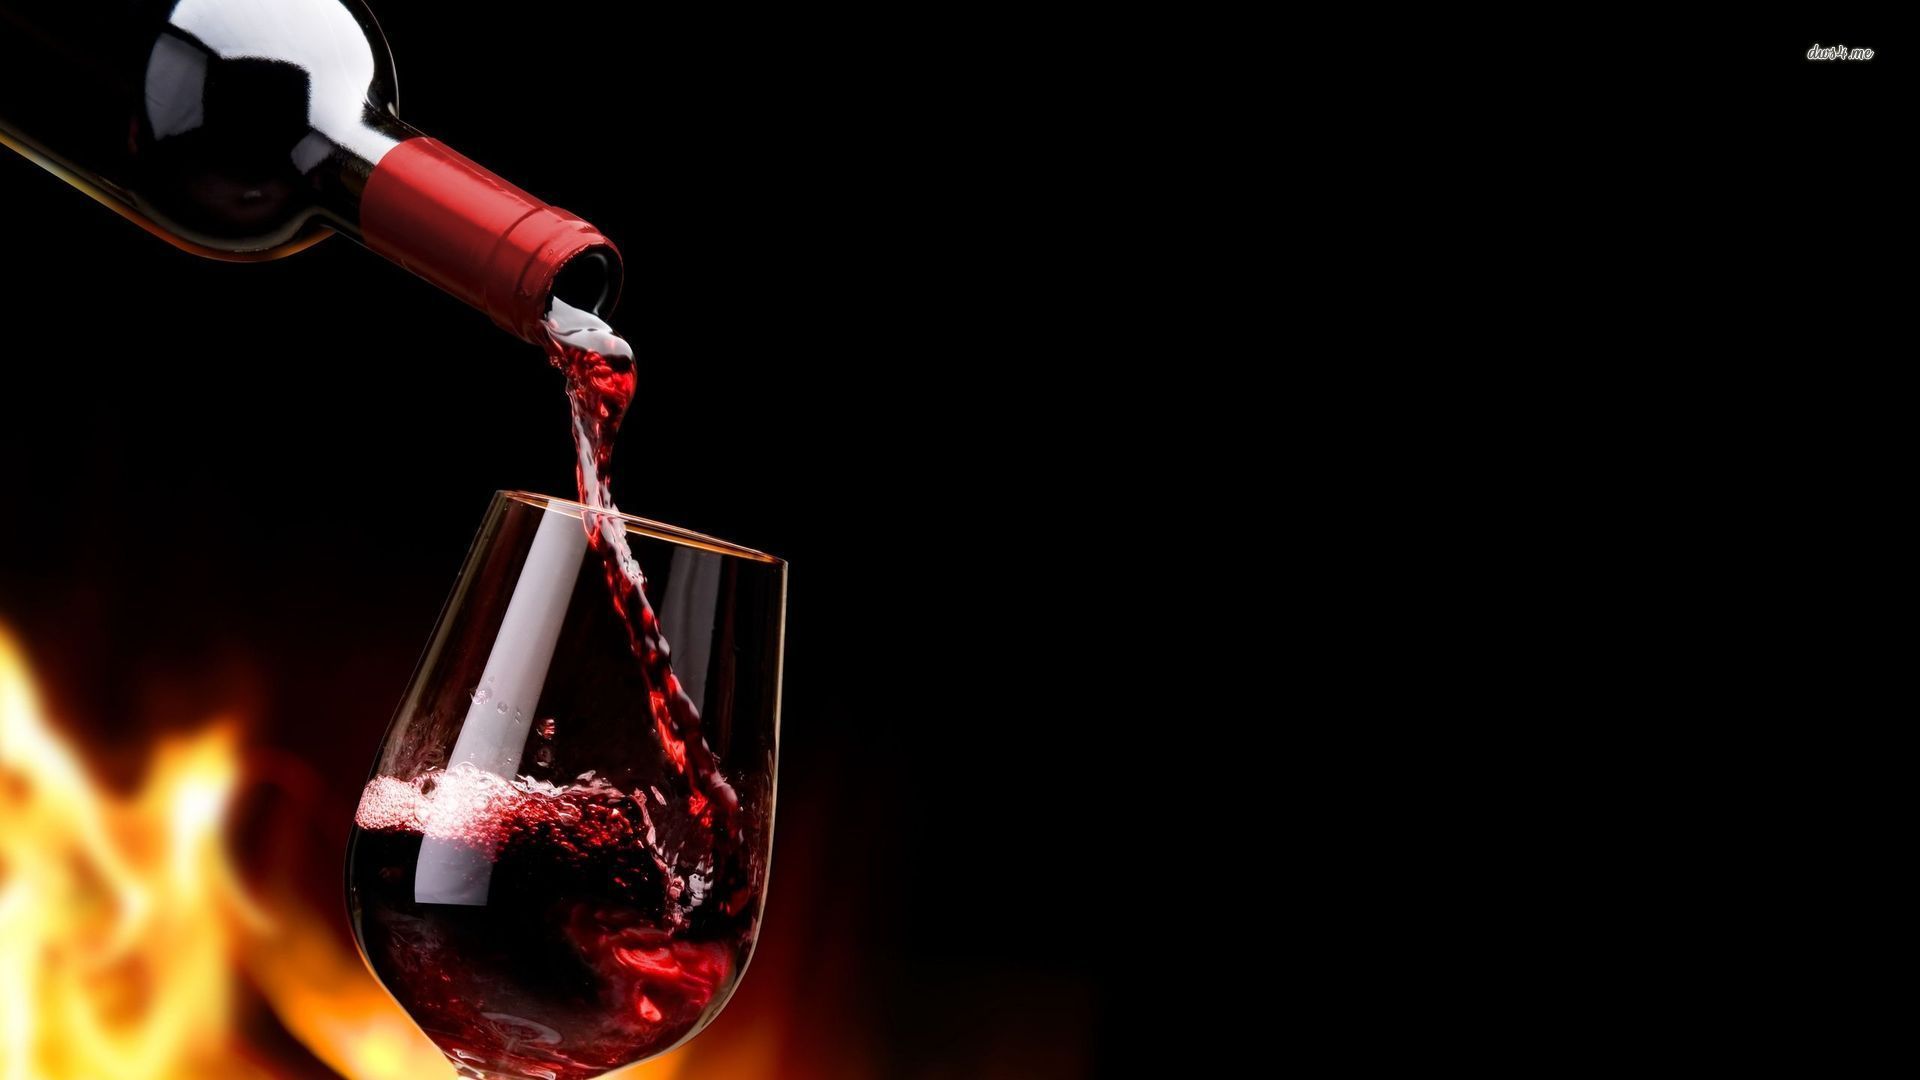 Red wine wallpaper - Photography wallpapers -